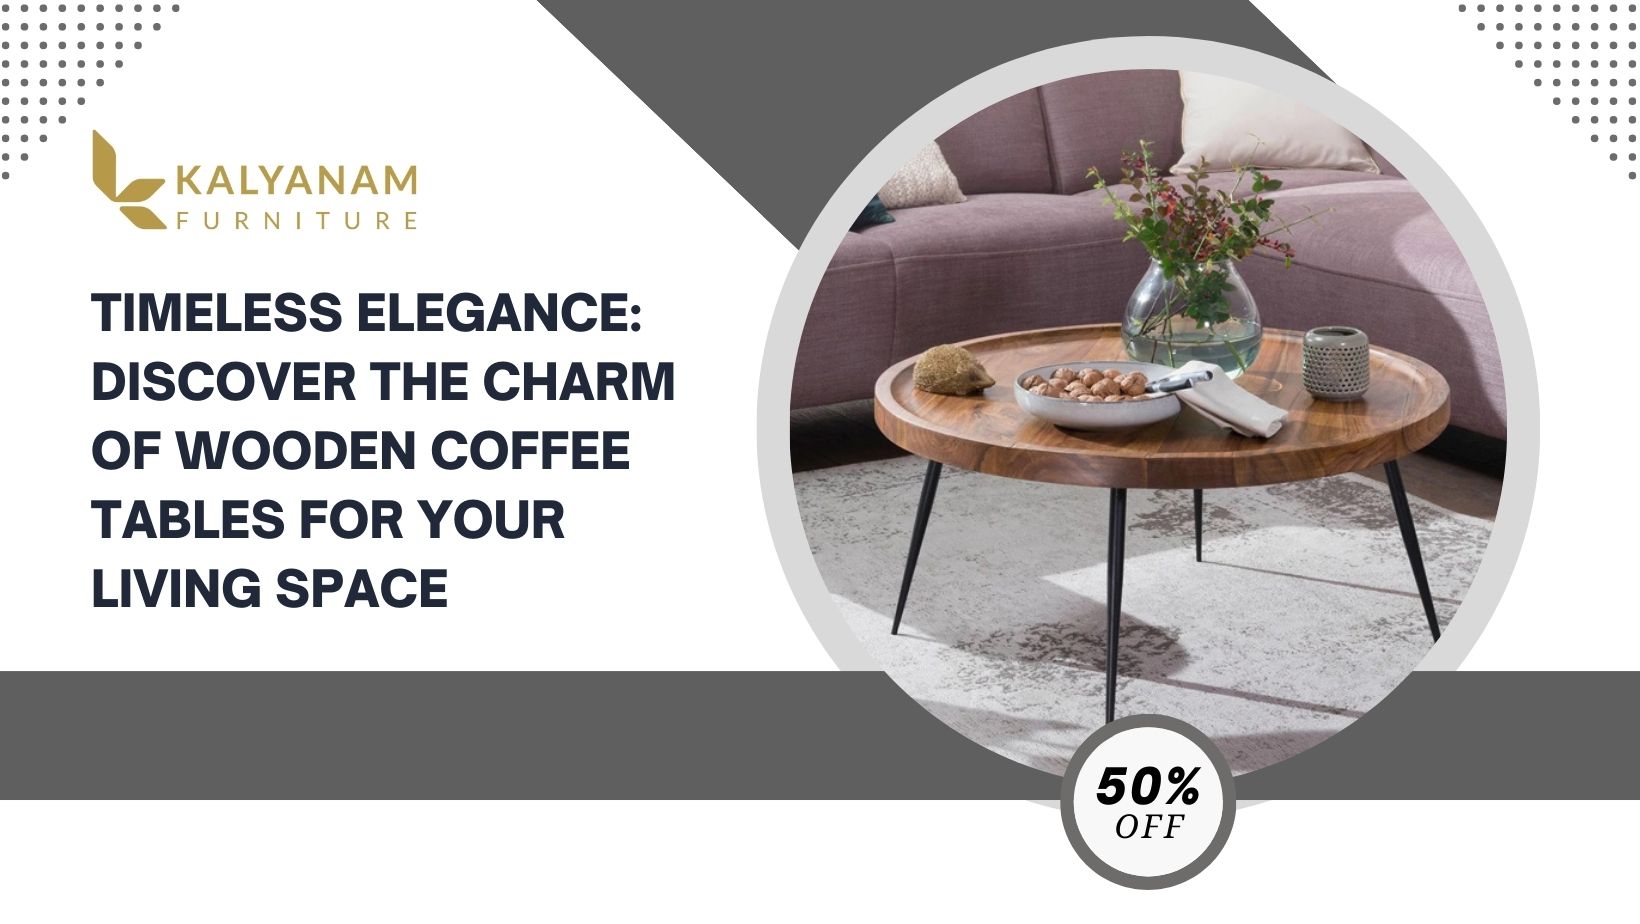 Timeless Elegance: Discover the Charm of Wooden Coffee Tables for Your Living Space